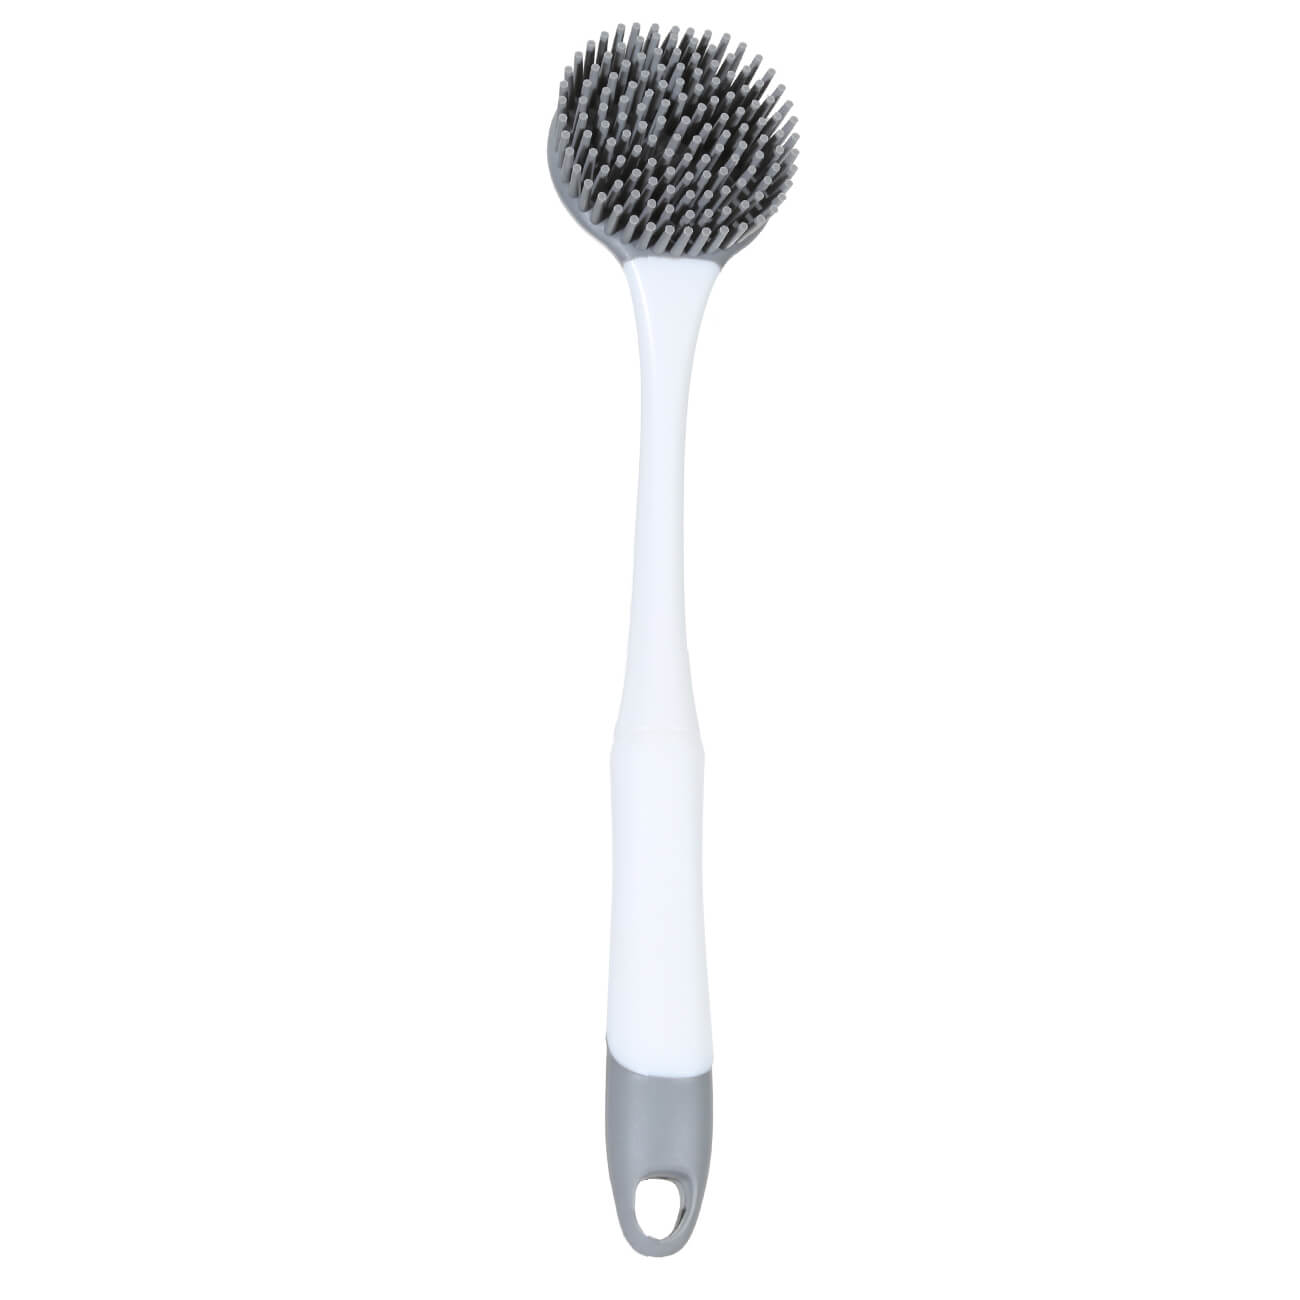 Cleaning brush, 30 cm, double-sided, rubber / plastic, gray-white, Clean изображение № 1